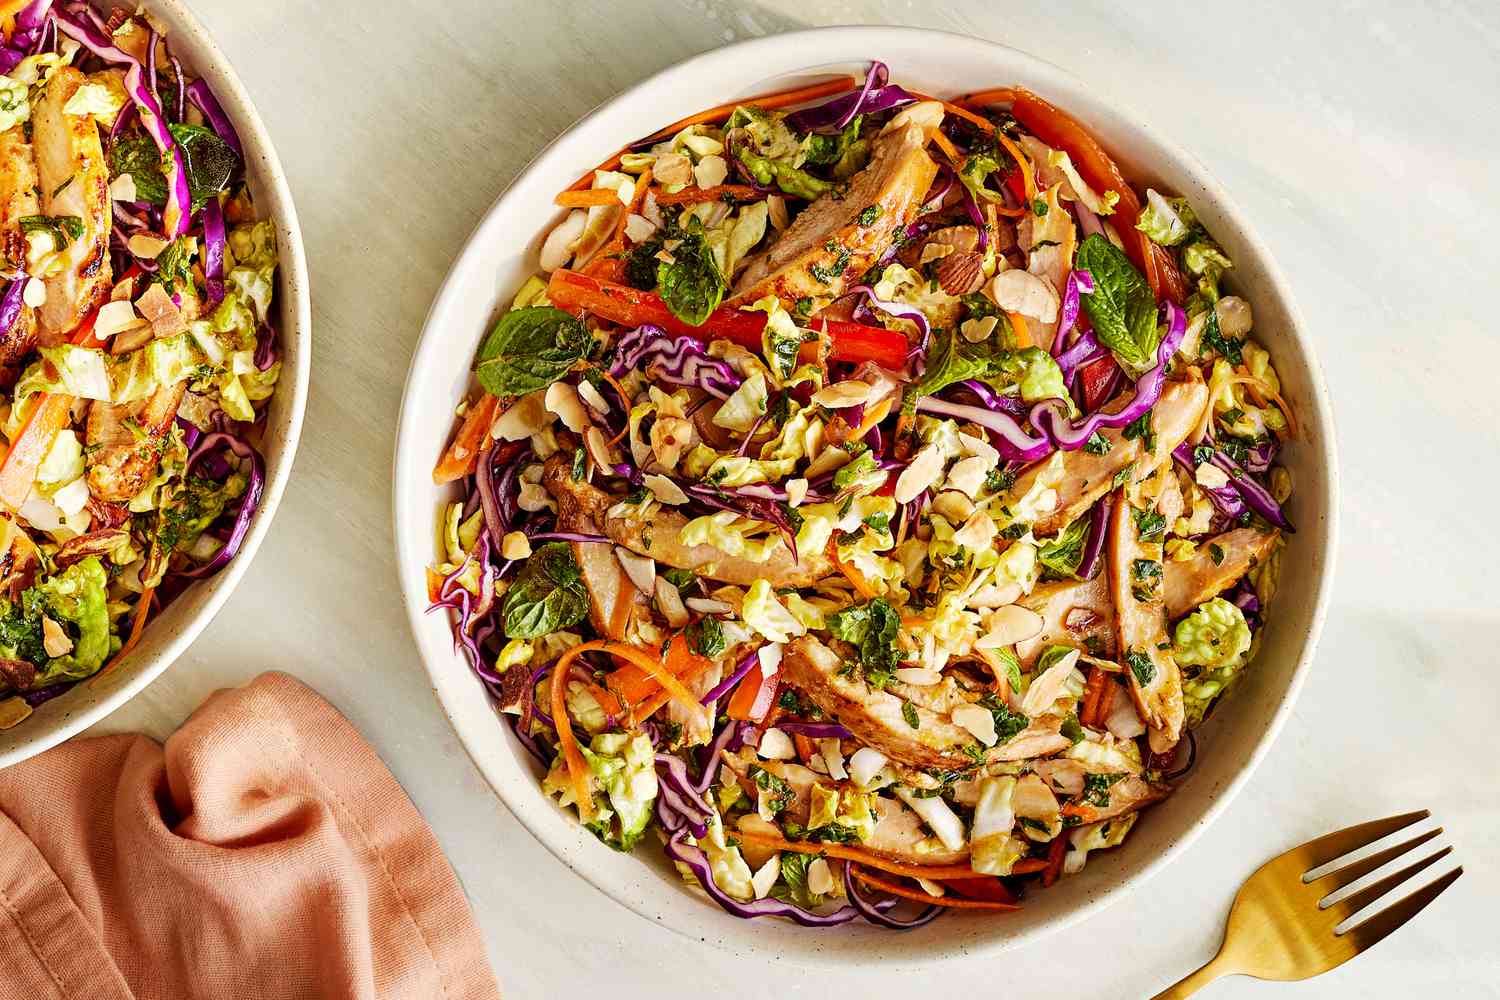 leftover-grilled-chicken-give-it-new-life-with-this-cabbage-and-tahini-salad